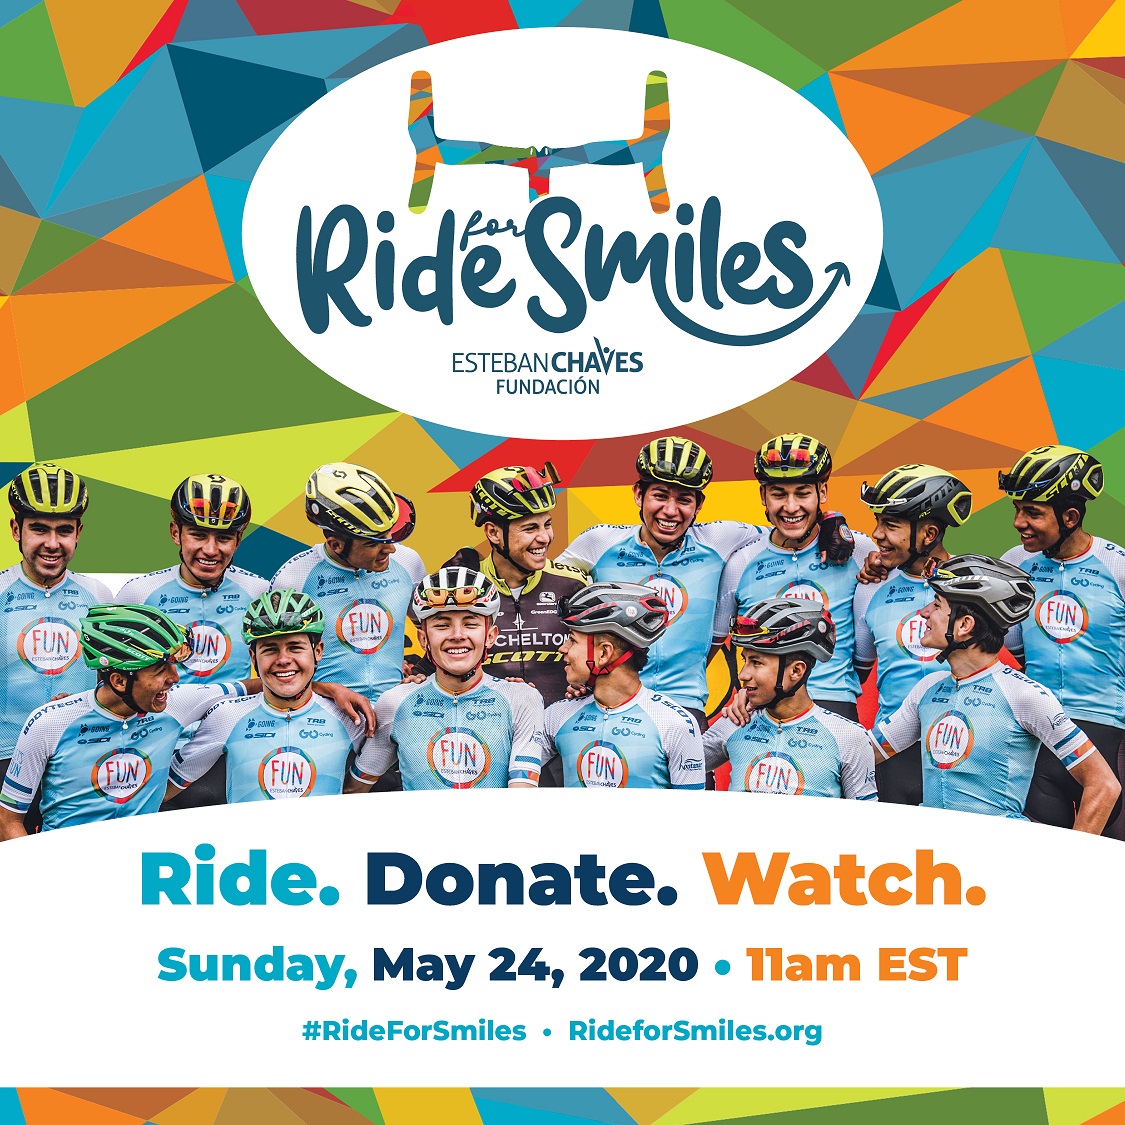 Ride for Smiles